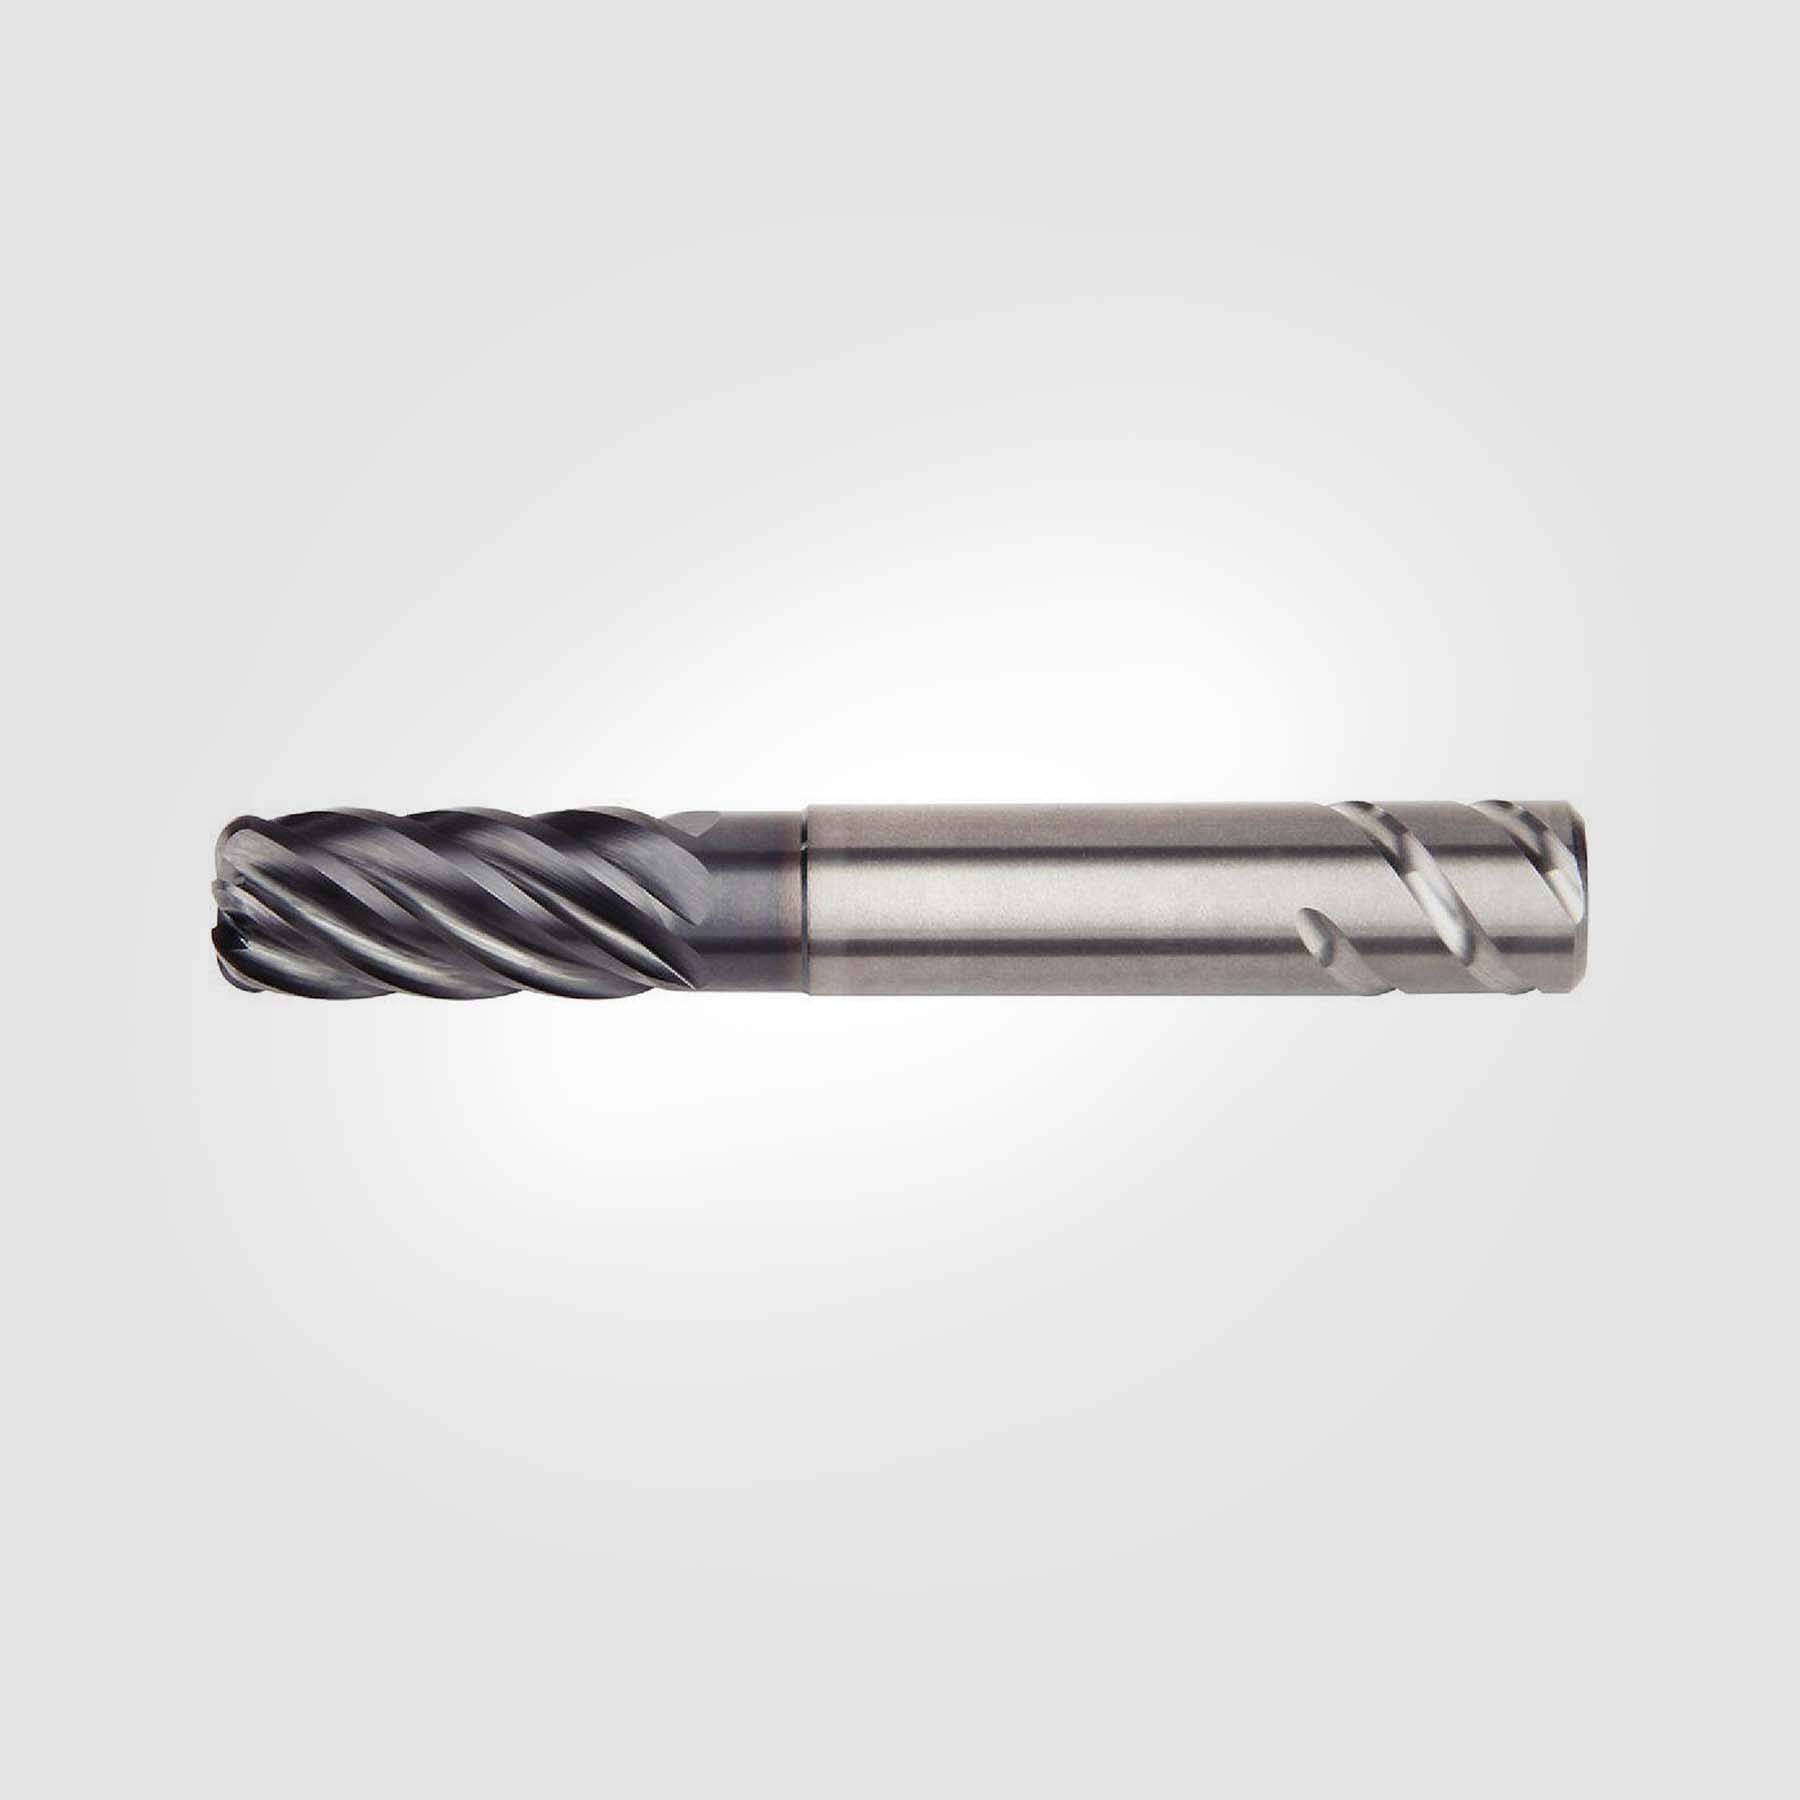 HARVI III | 1/2" x 1/2" x 1 1/4" x 4" | SOLID CARBIDE NECKED ENDMILL 6 FLUTE | 5351828